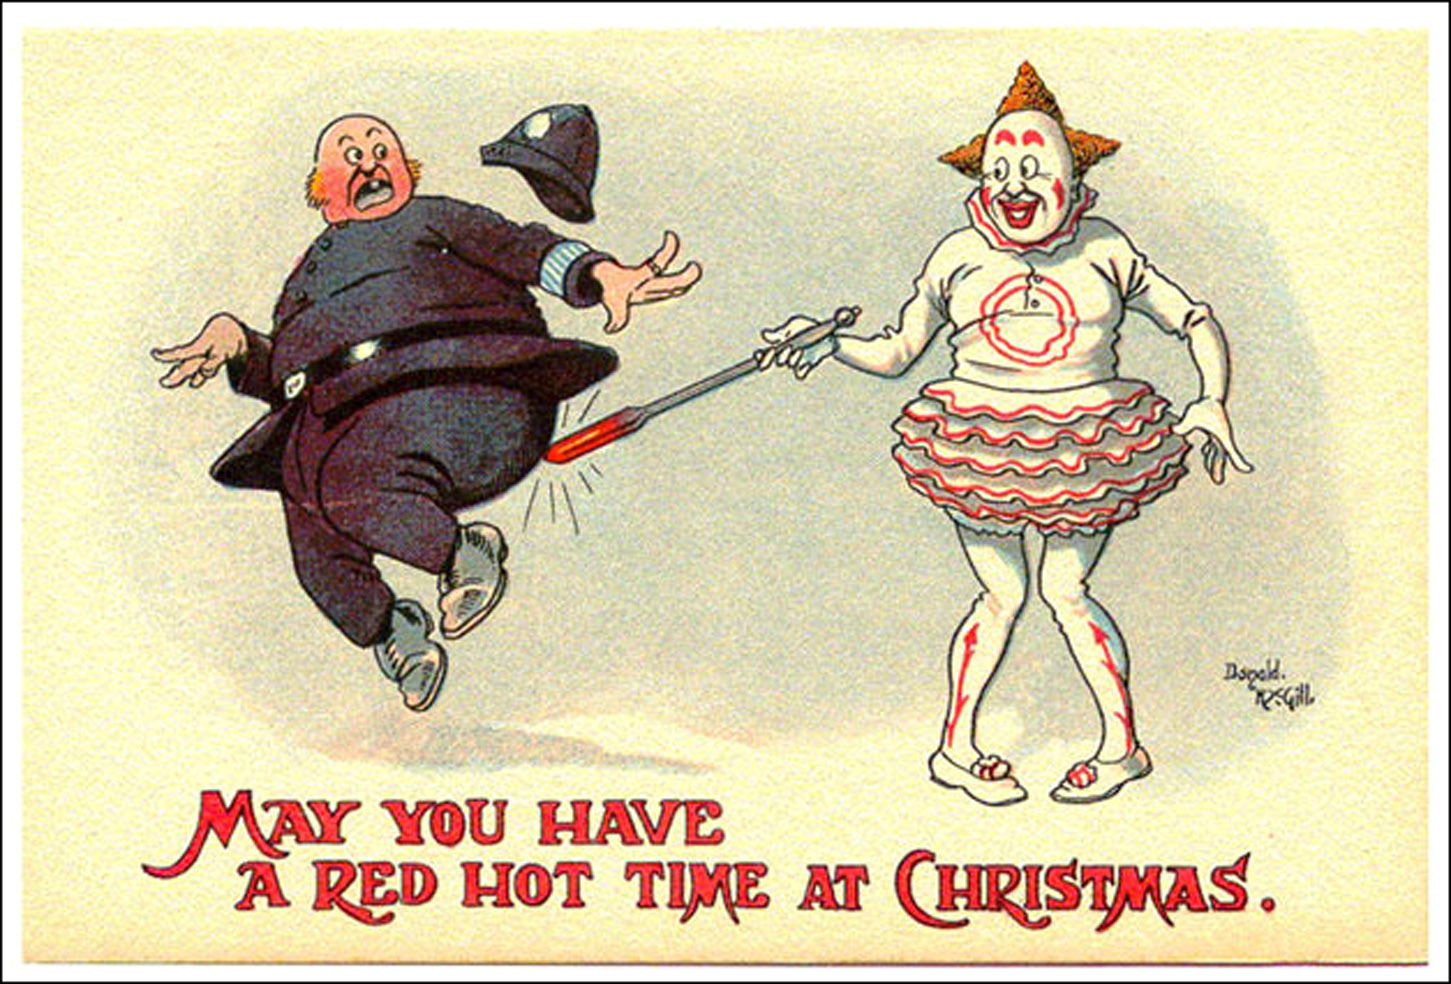 Clown touches policeman with red hot poker - by Donald-mcGill funny Christmas card